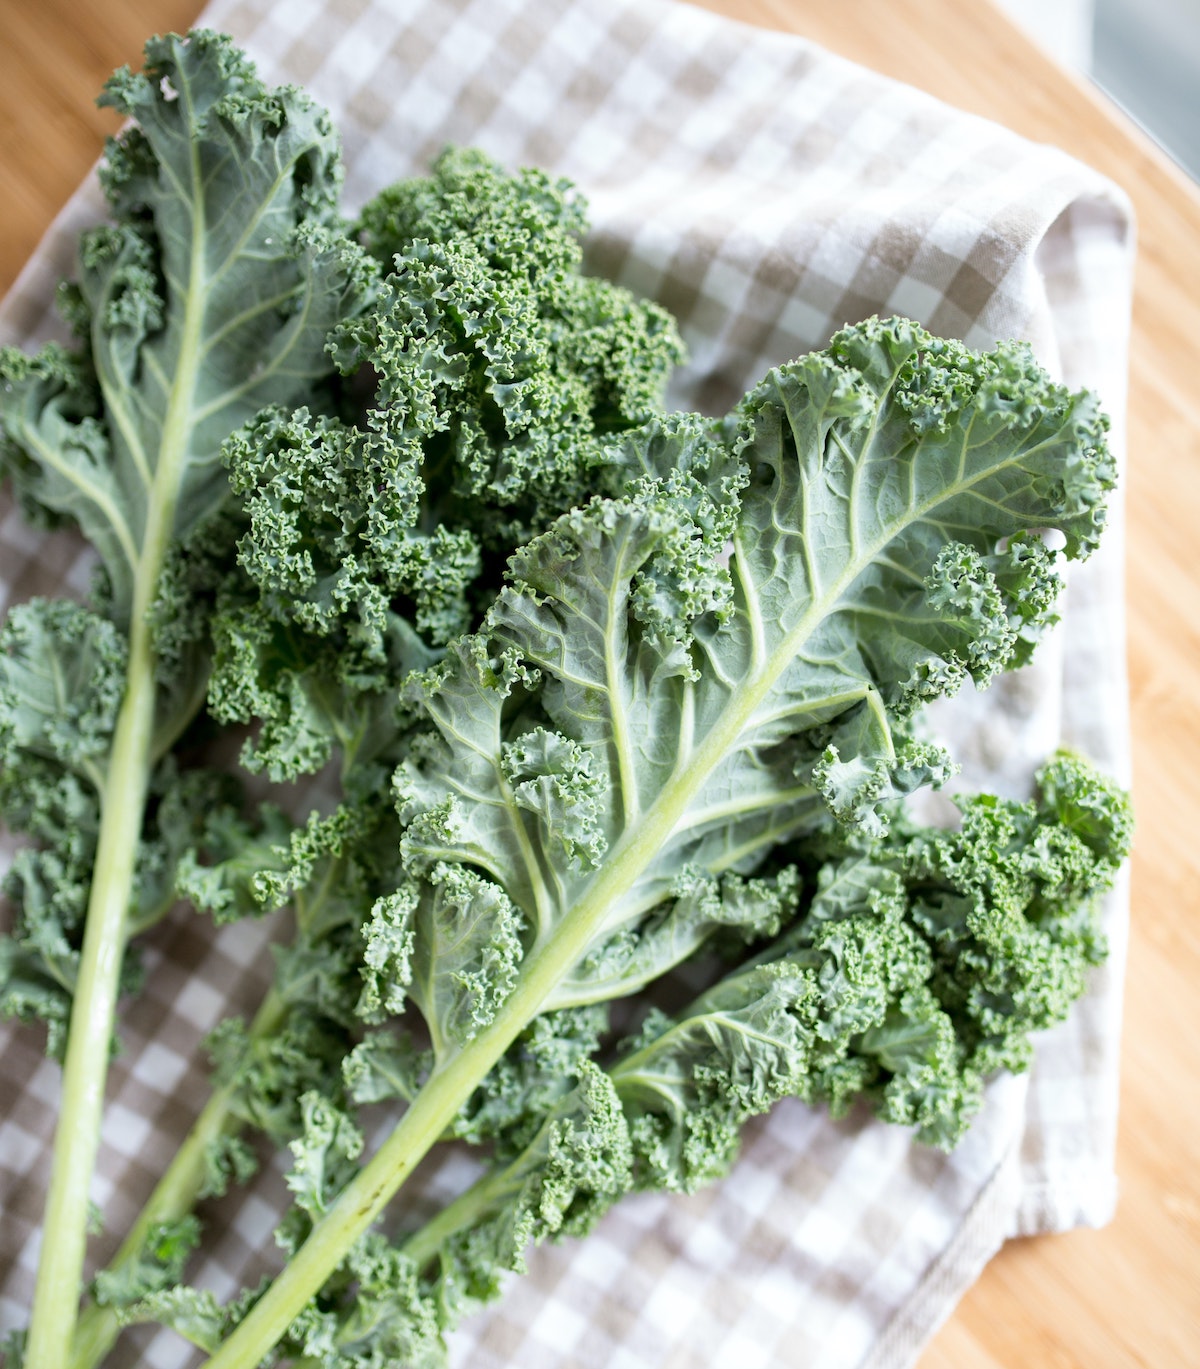 Tried & Tested: 3 Easy Recipes from the I Hate Kale Cookbook That